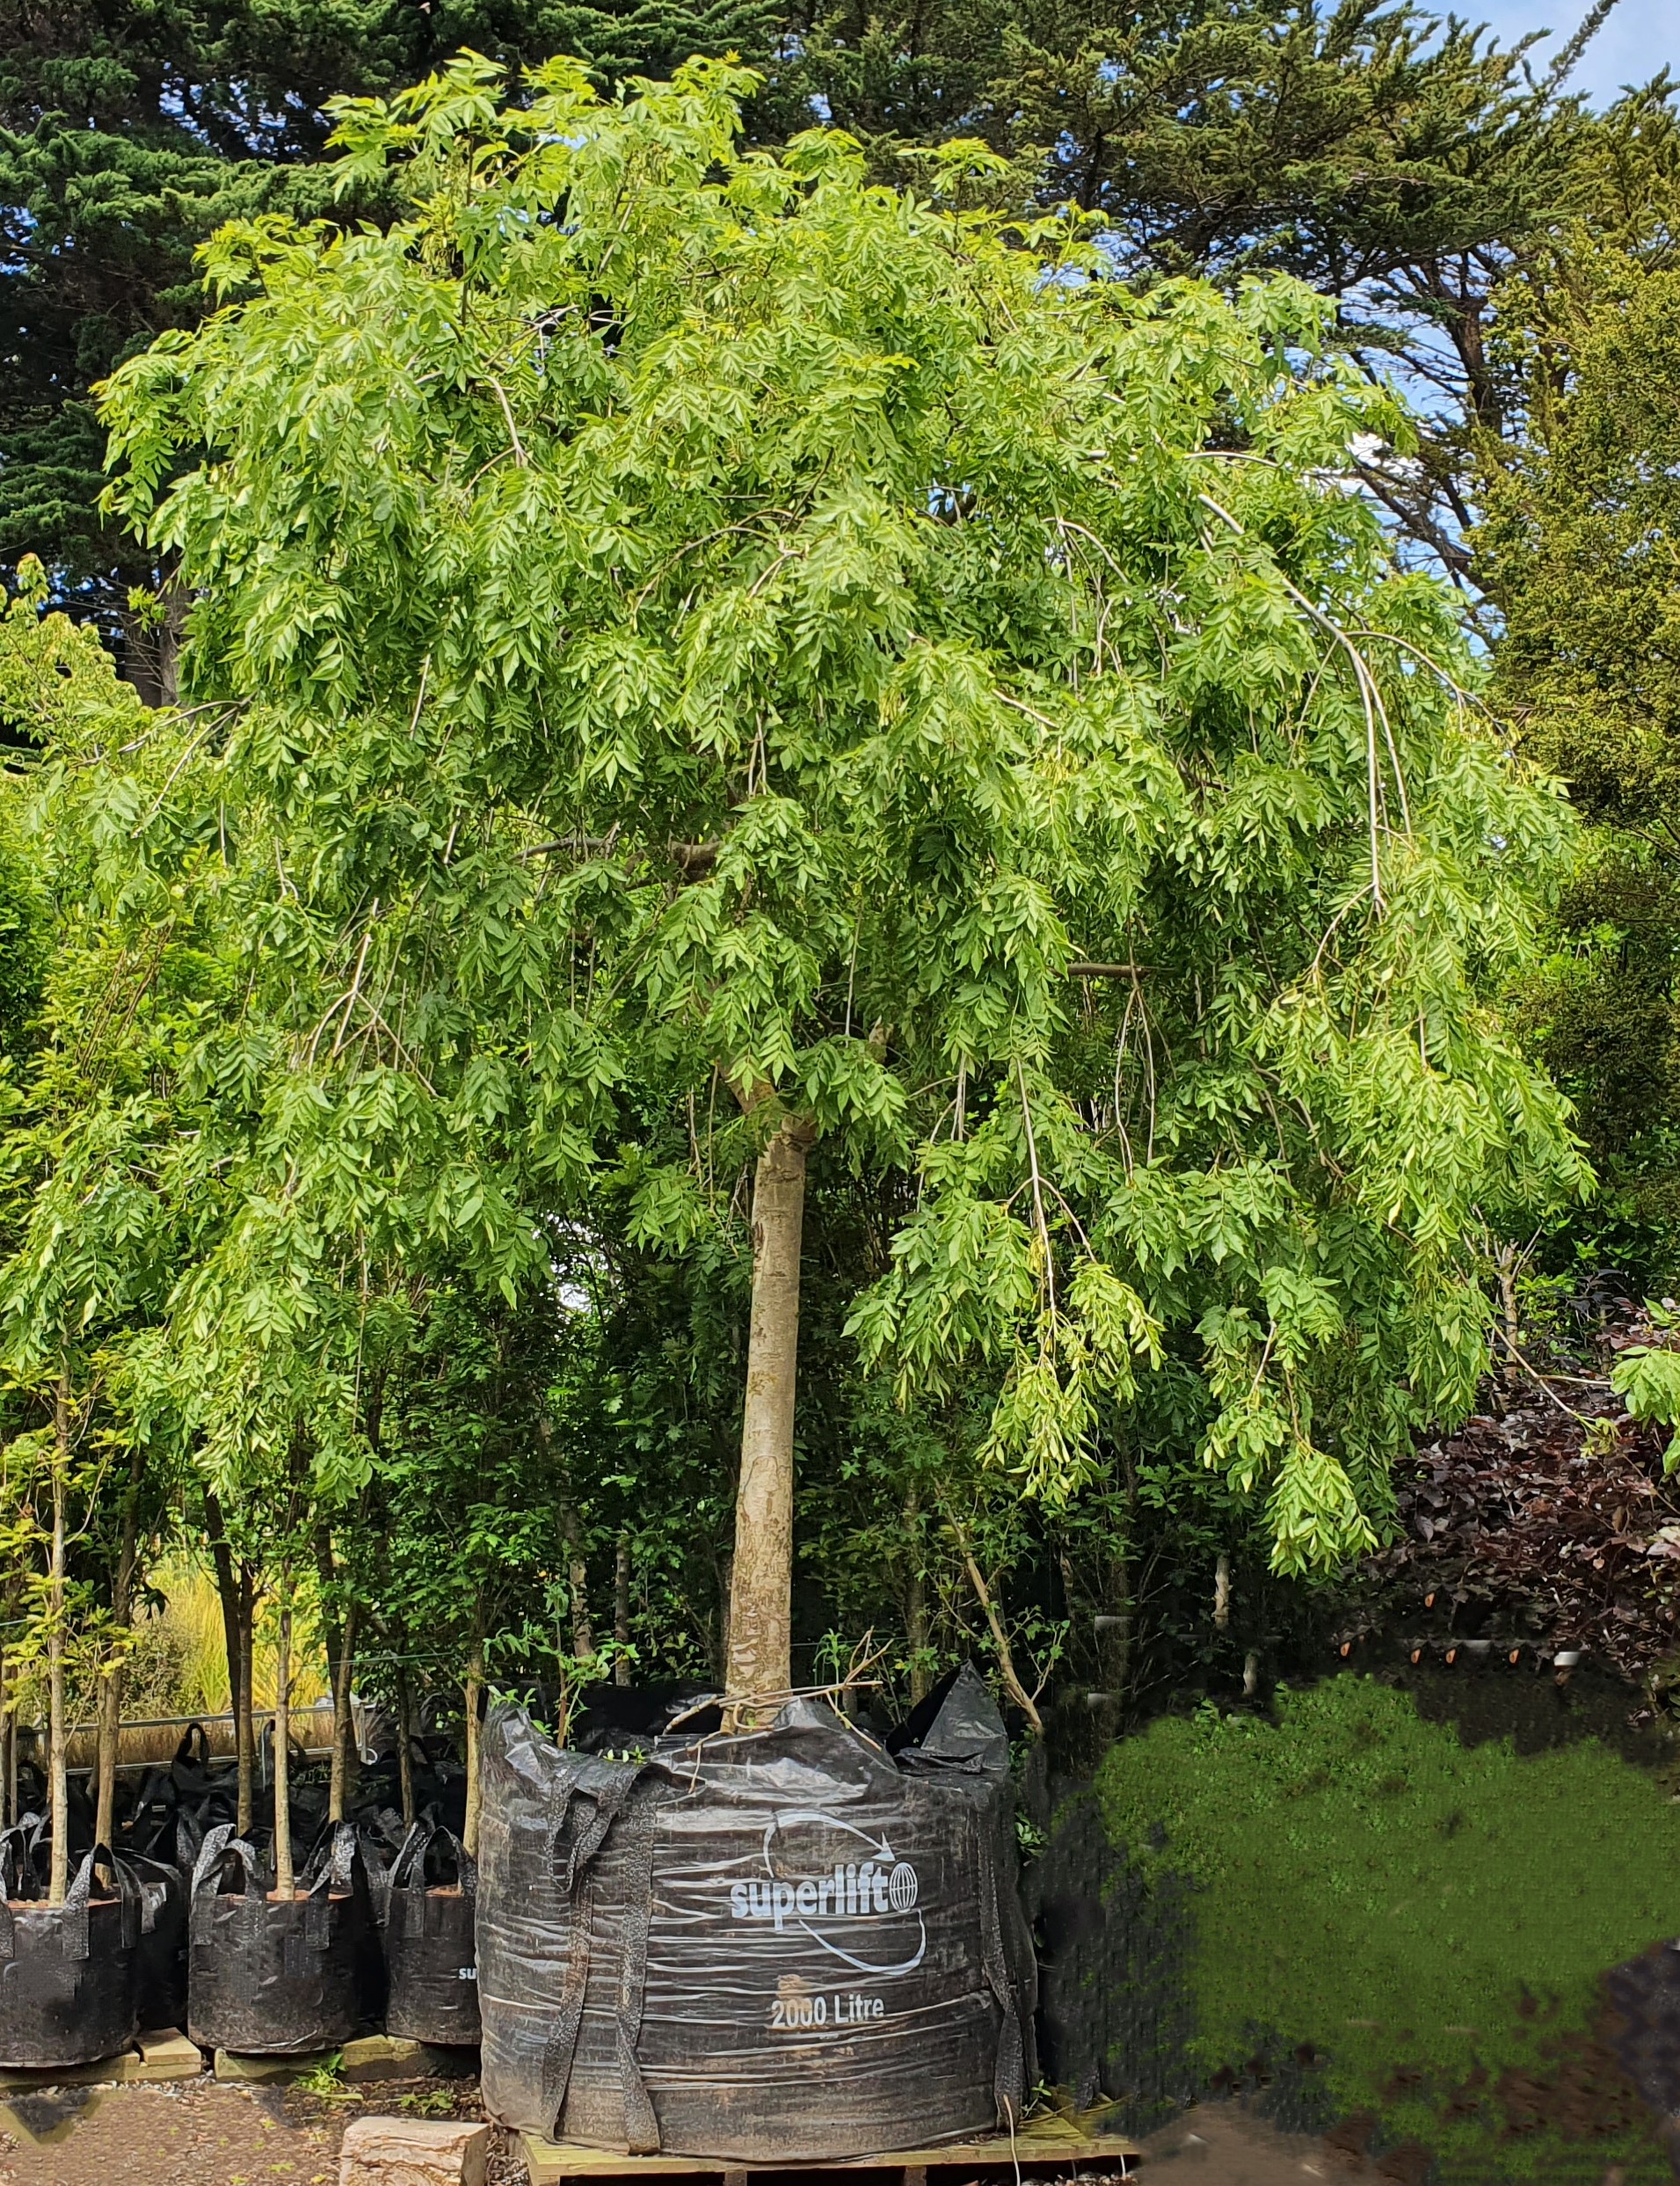 FRAXINUS excelsior ‘Pendula’ – Weeping Green Ash